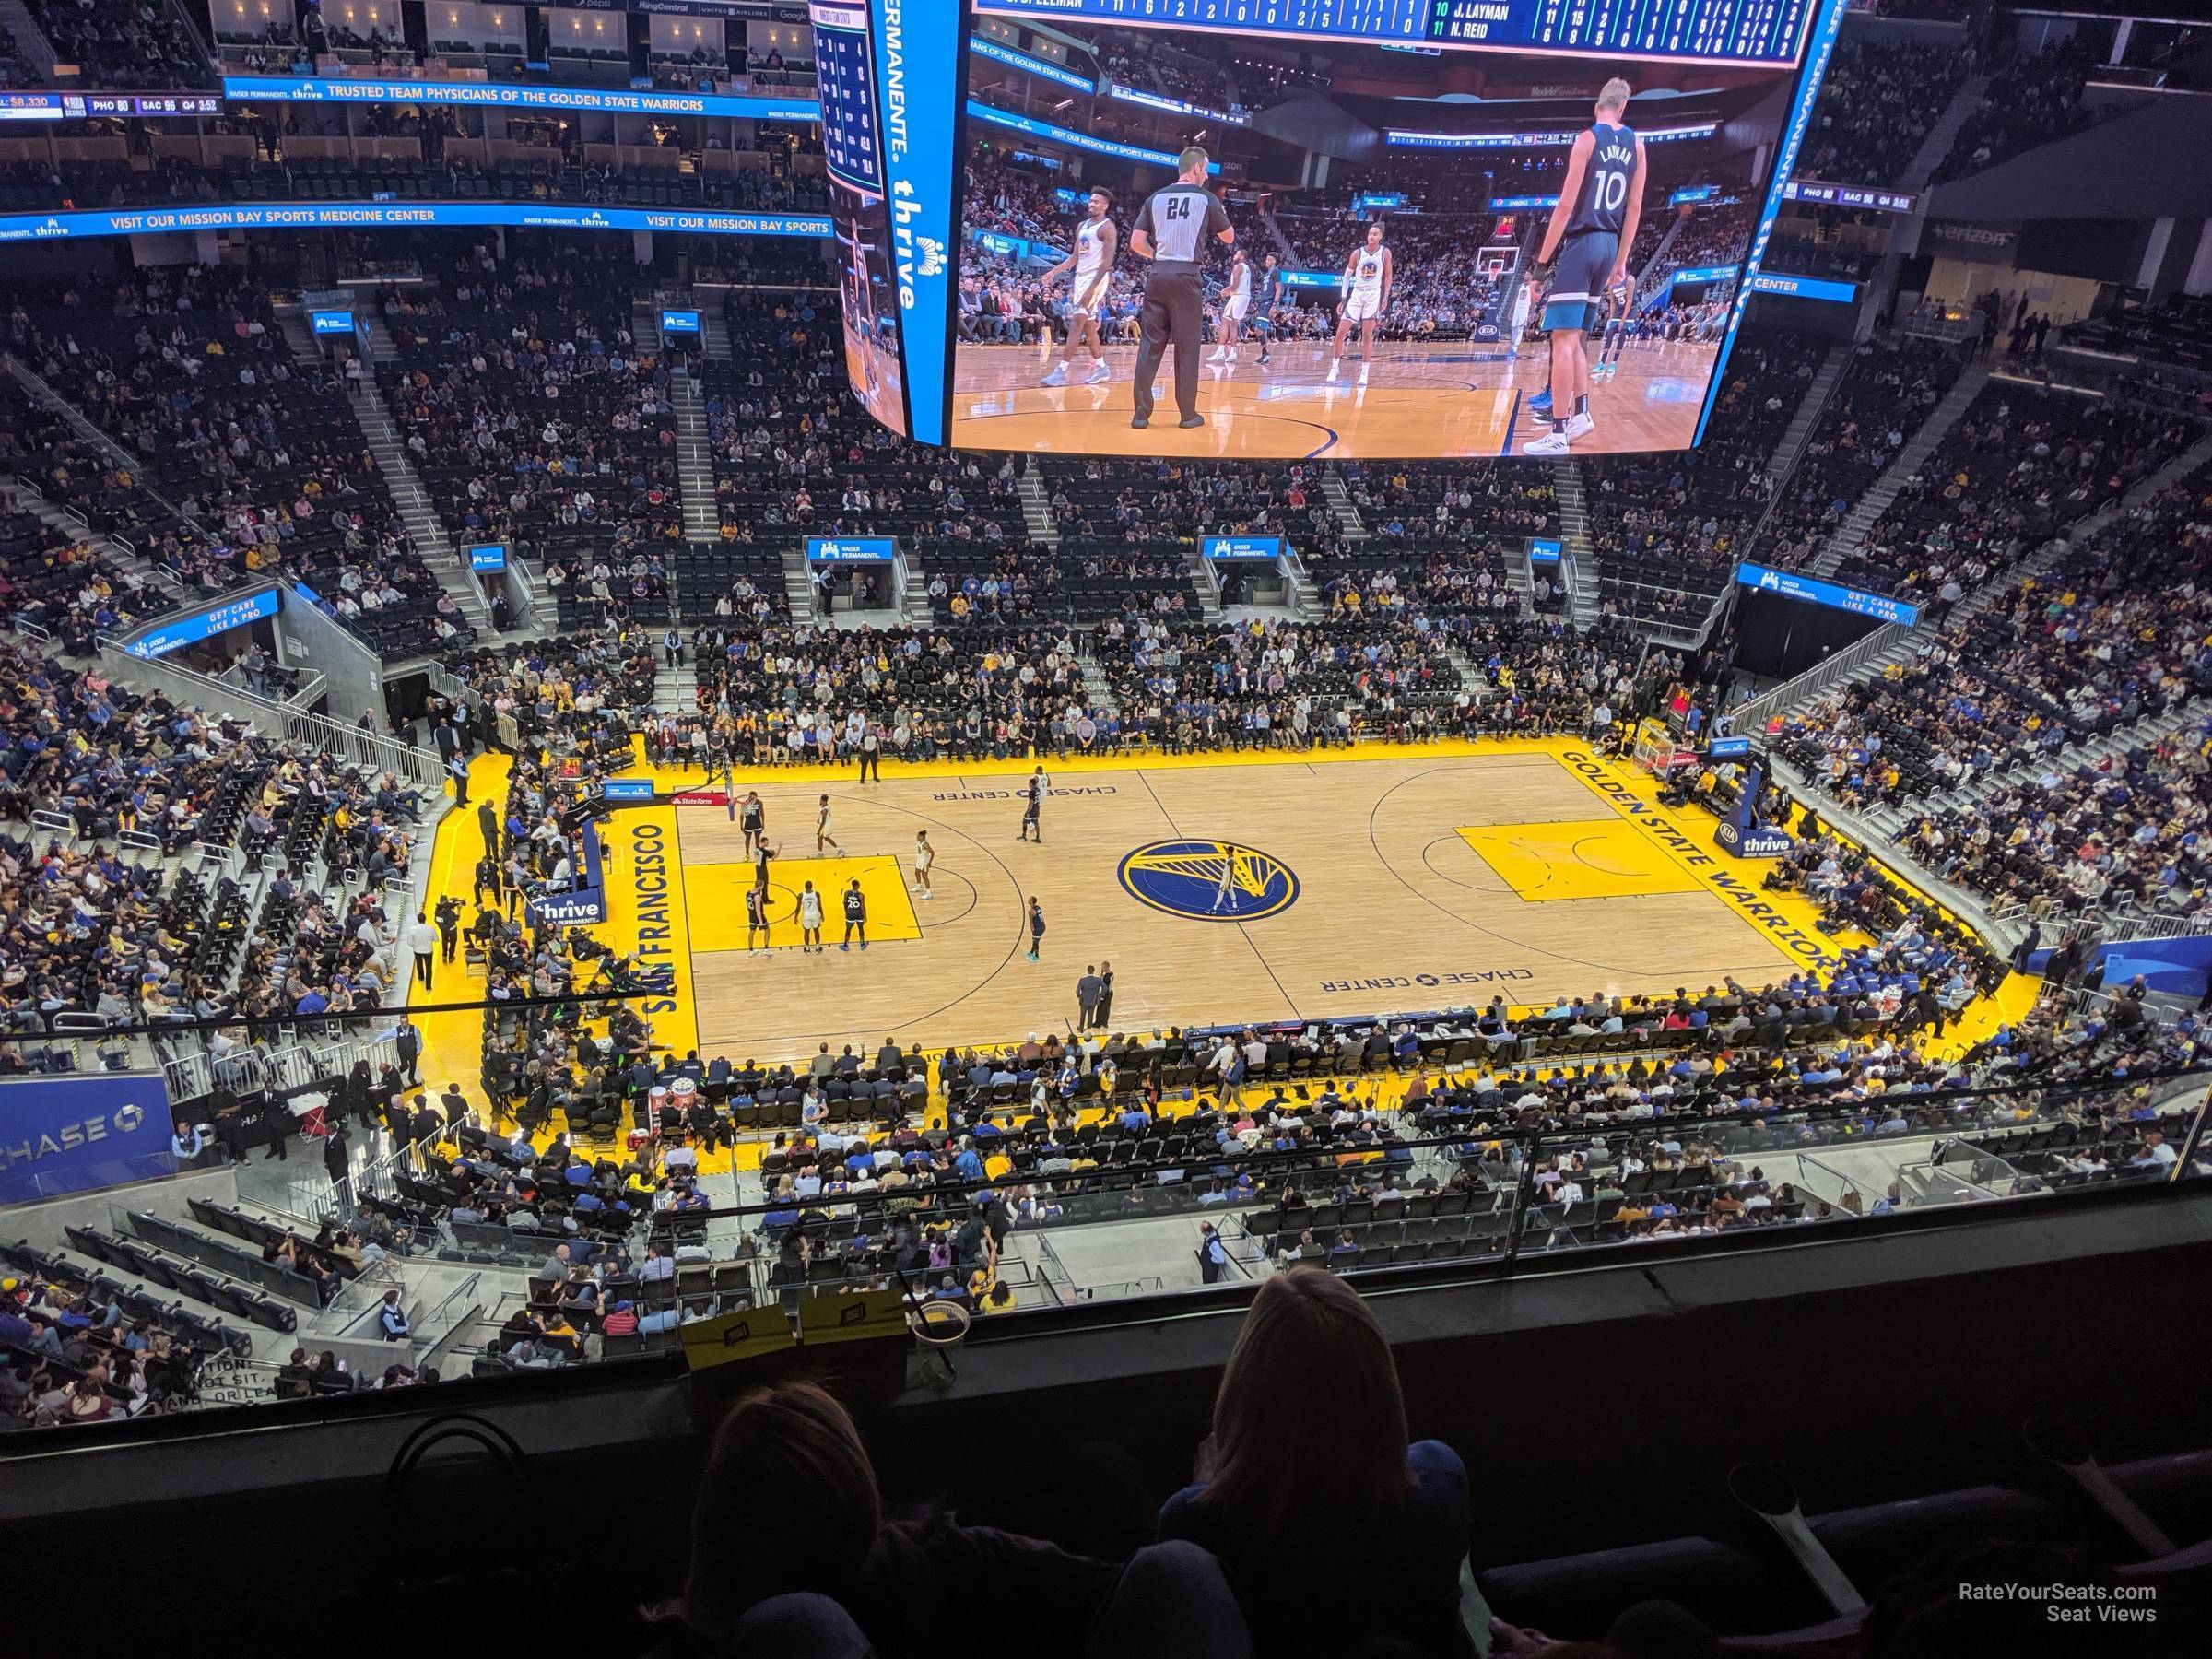 section 207, row 8 seat view  for basketball - chase center